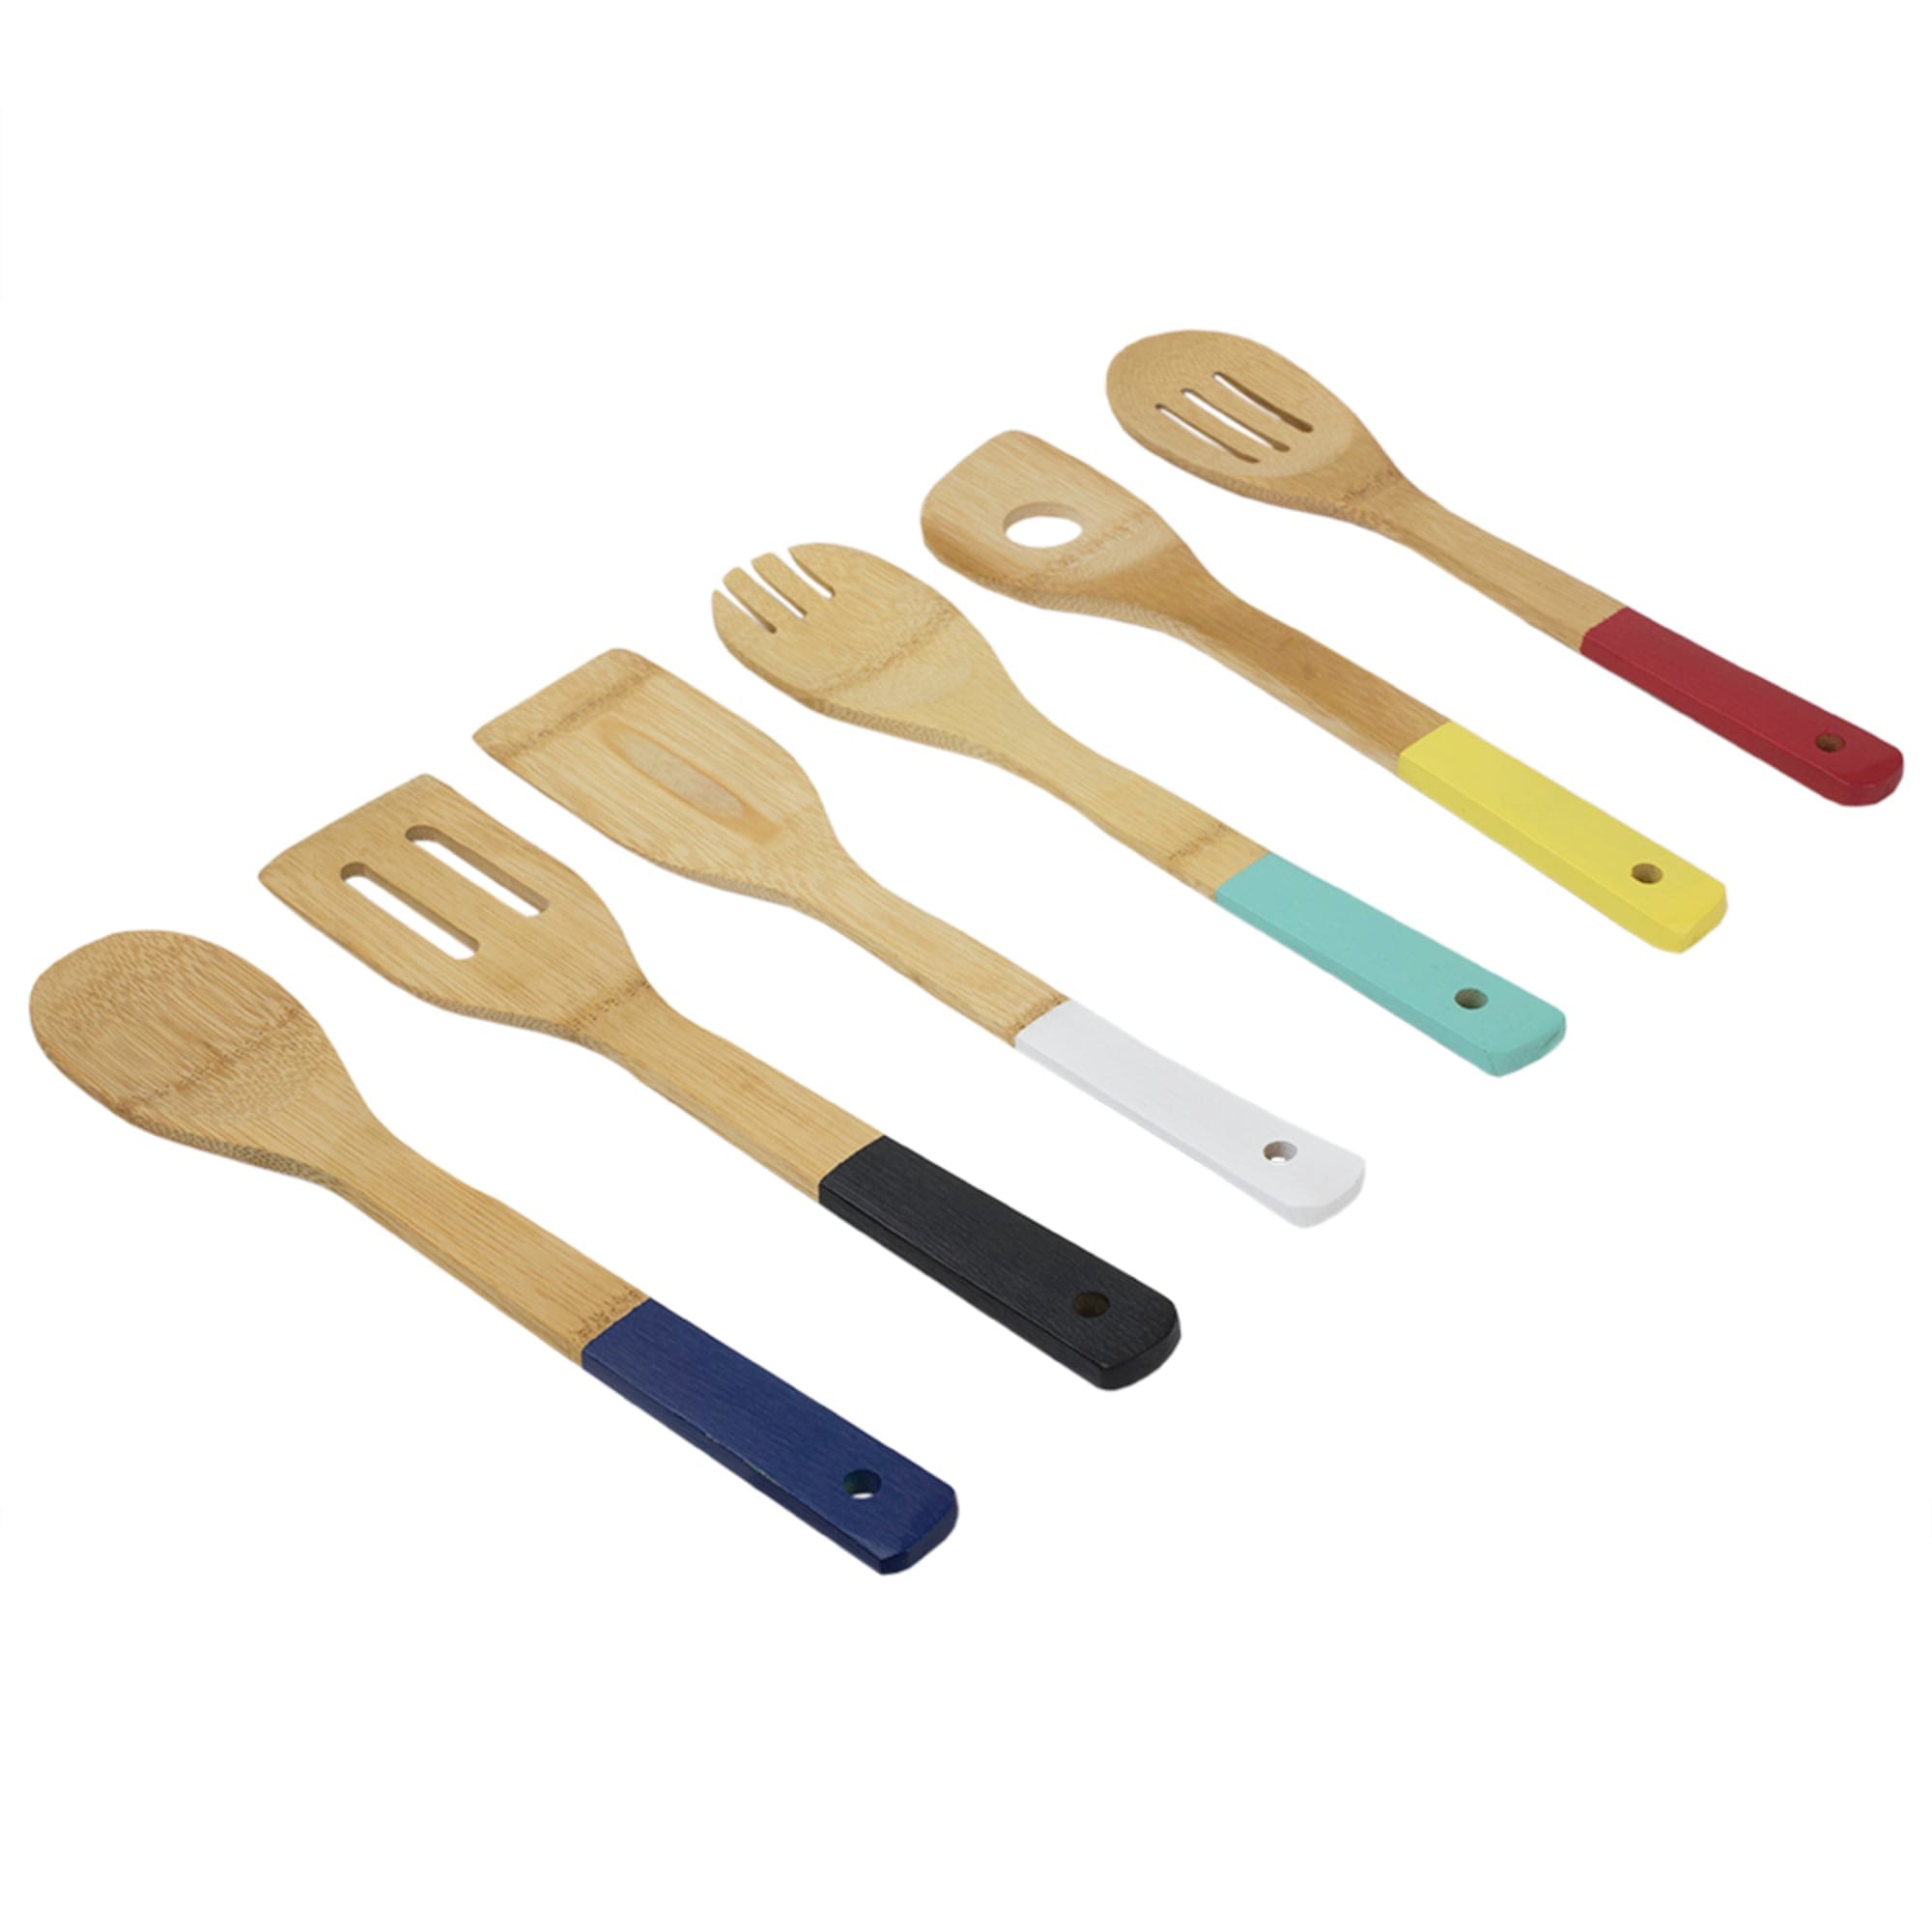 Home Basics 6 Piece Bamboo Kitchen Tool Set $5.00 EACH, CASE PACK OF 24